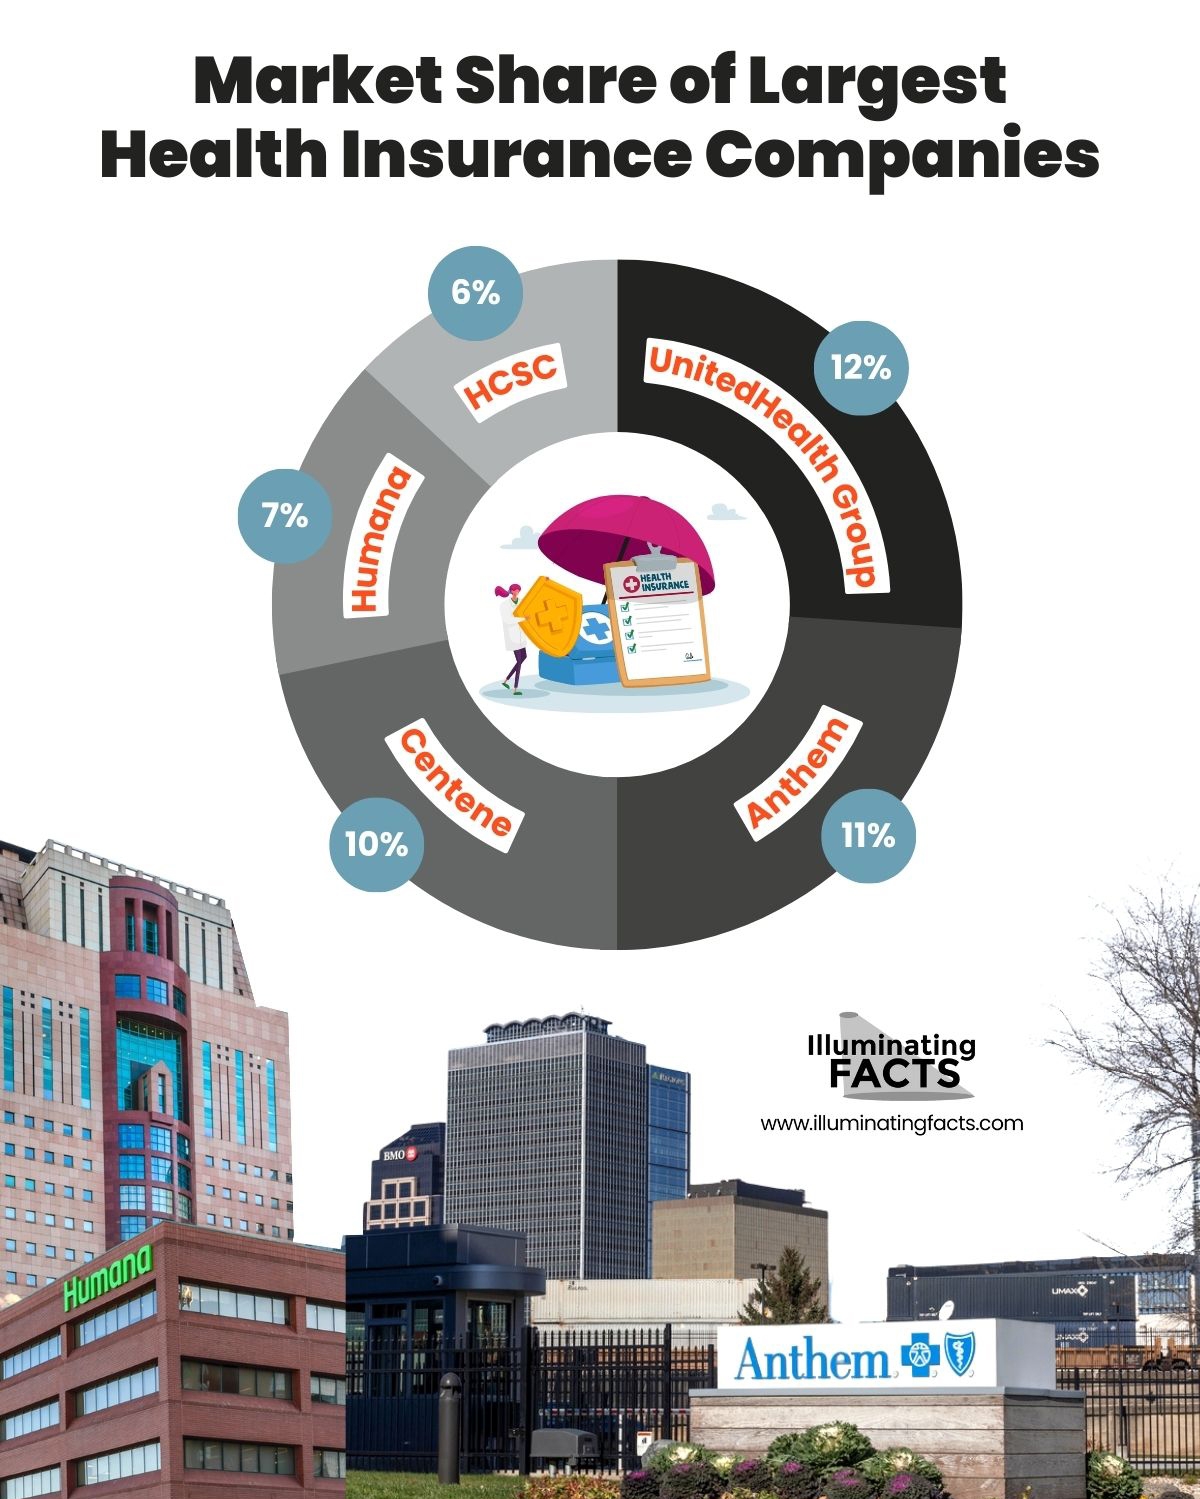 Market Share of Largest Health Insurance Companies